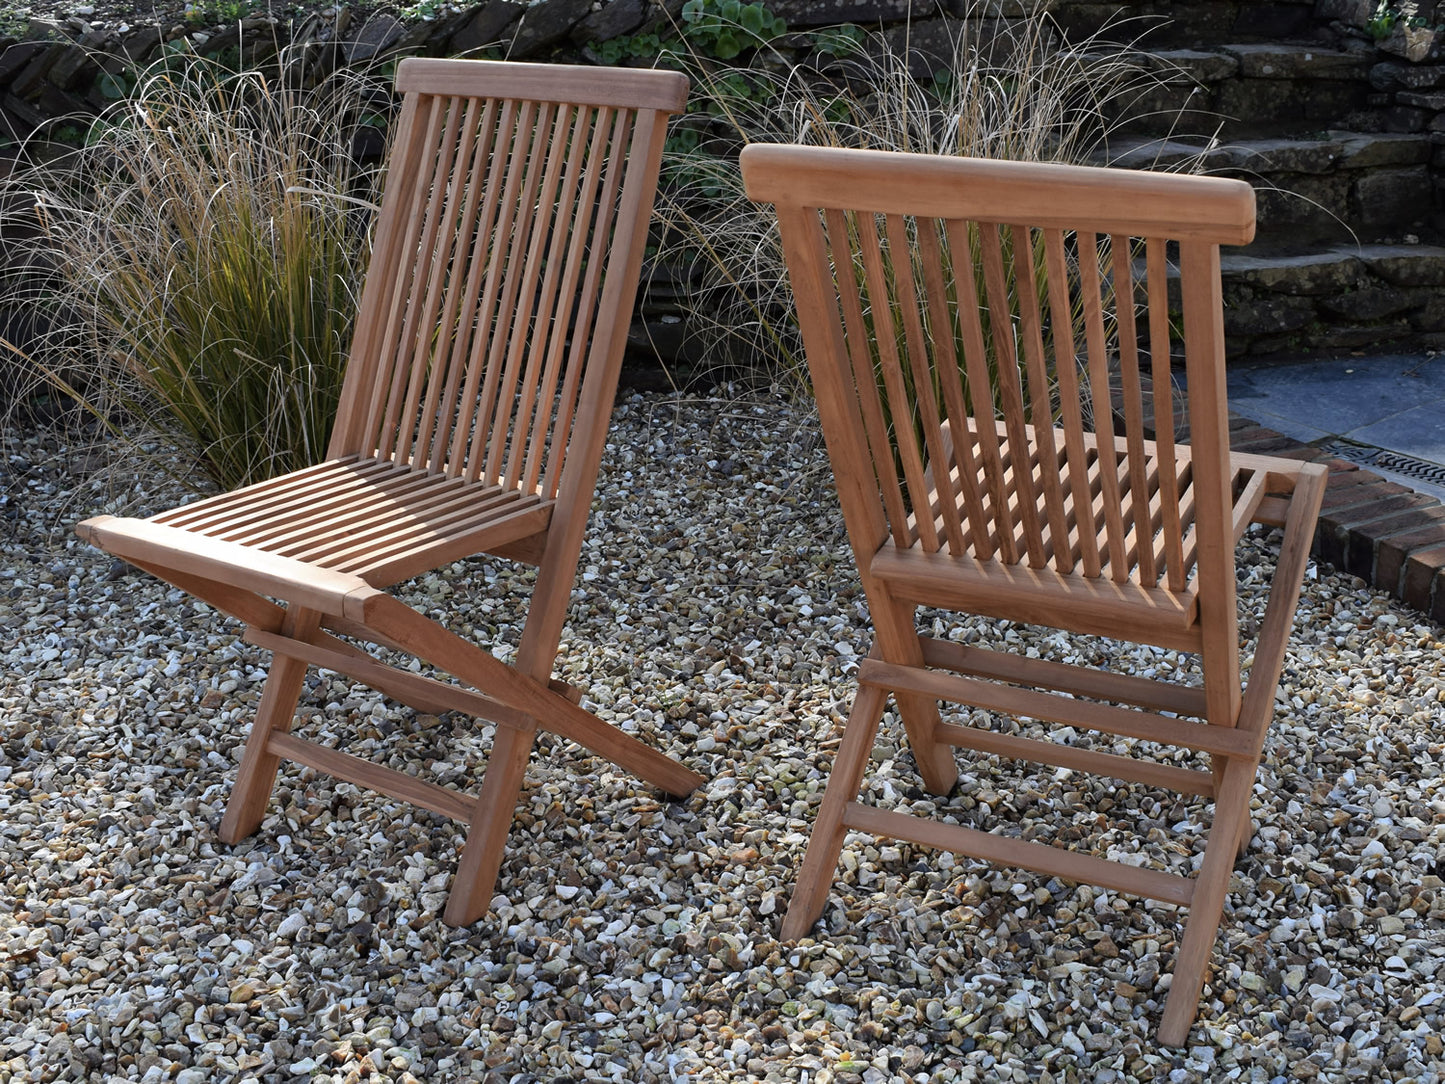 4 Seater Large Round Folding Teak Set with Classic Folding Chairs